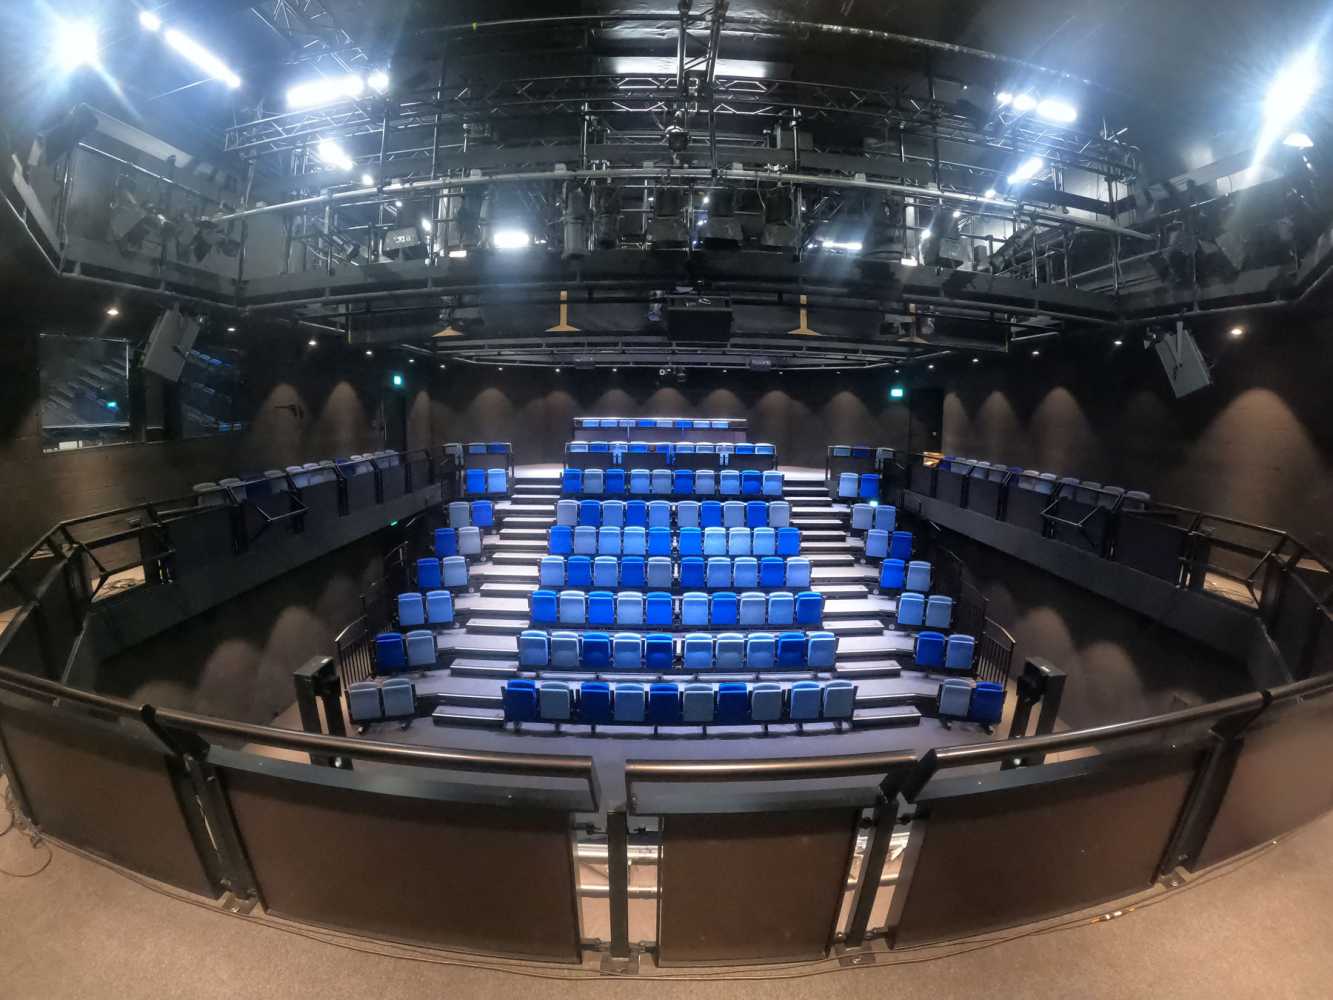 The 159-capacity Drum Theatre is part of the Theatre Royal Plymouth (TRP) complex